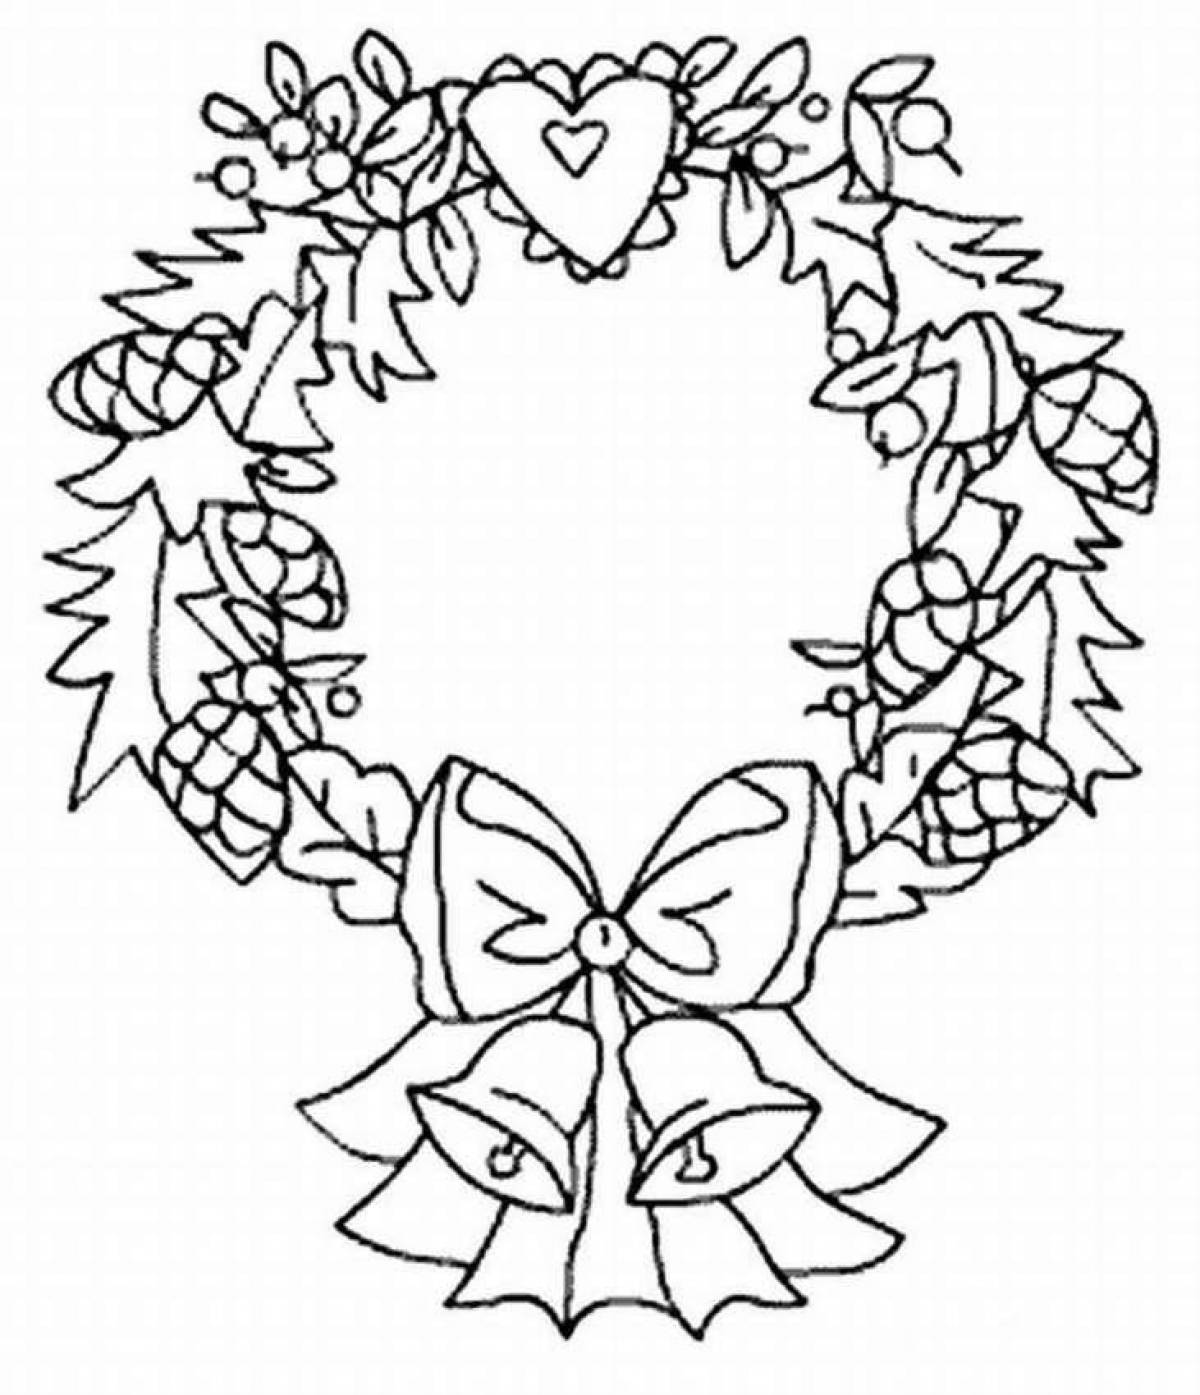 Fine Christmas wreath coloring page